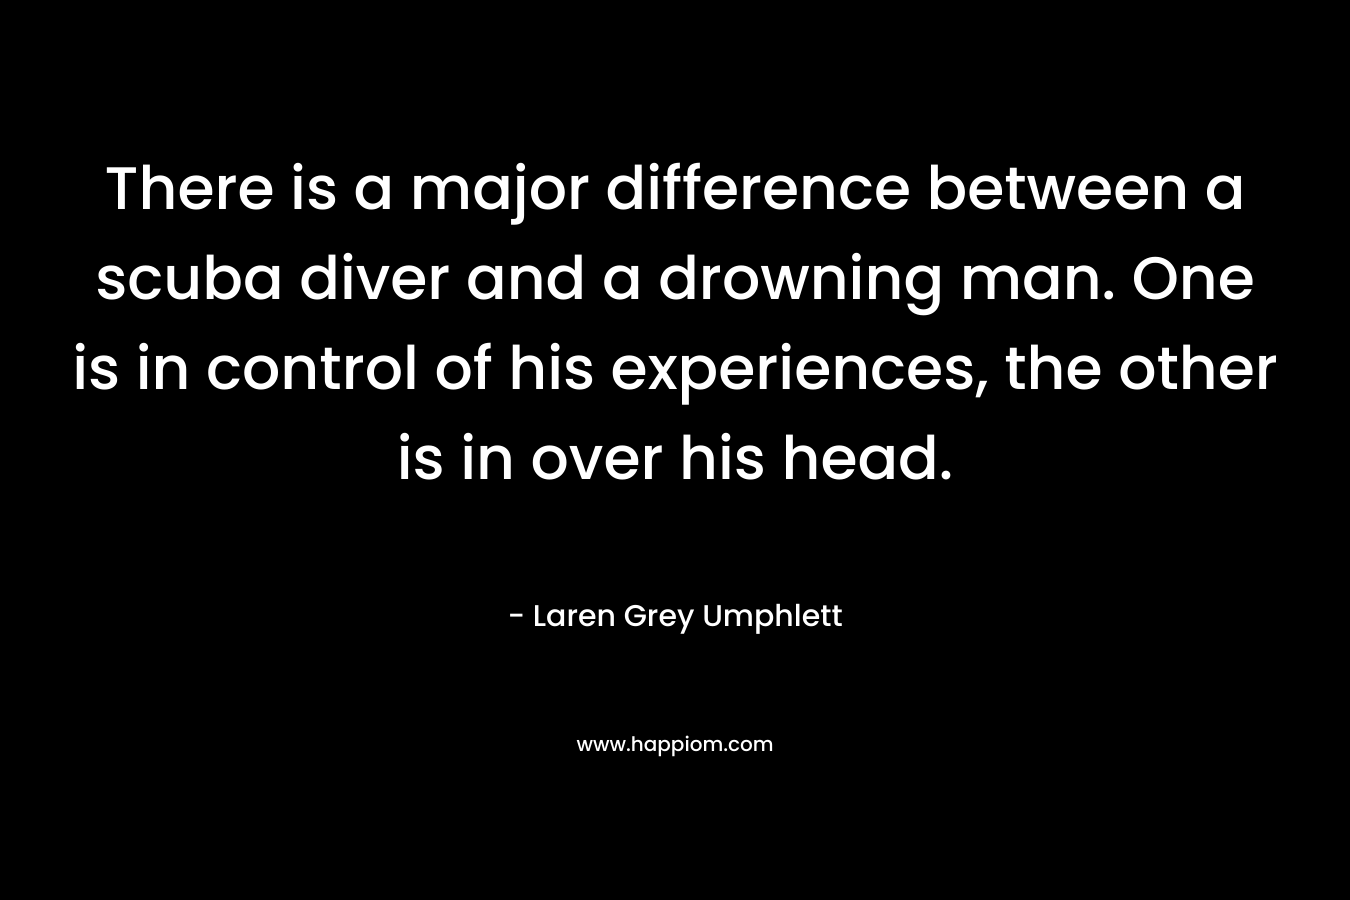 There is a major difference between a scuba diver and a drowning man. One is in control of his experiences, the other is in over his head.